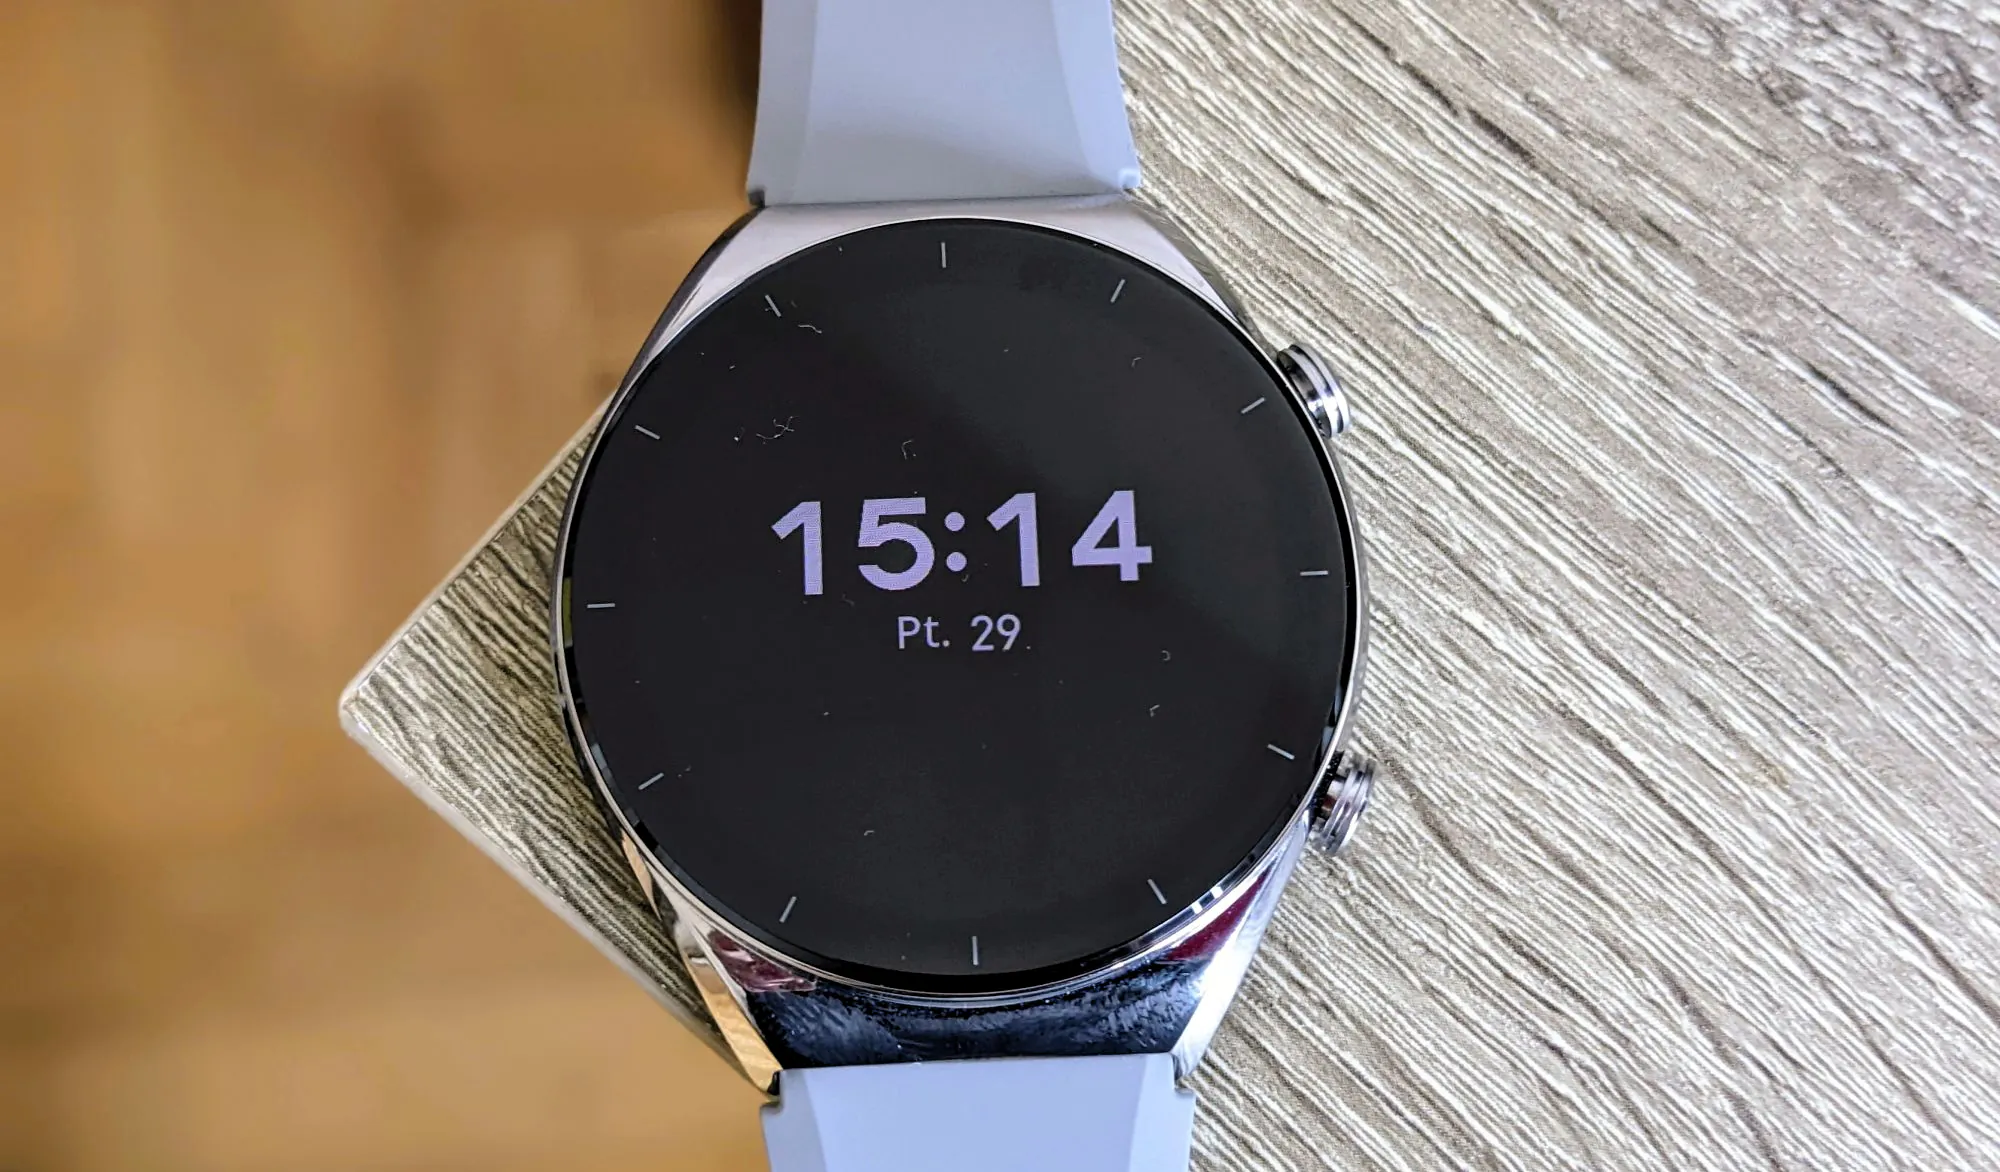 Xiaomi Watch S1 Review: 12 Day Battery Life And Classy Looks